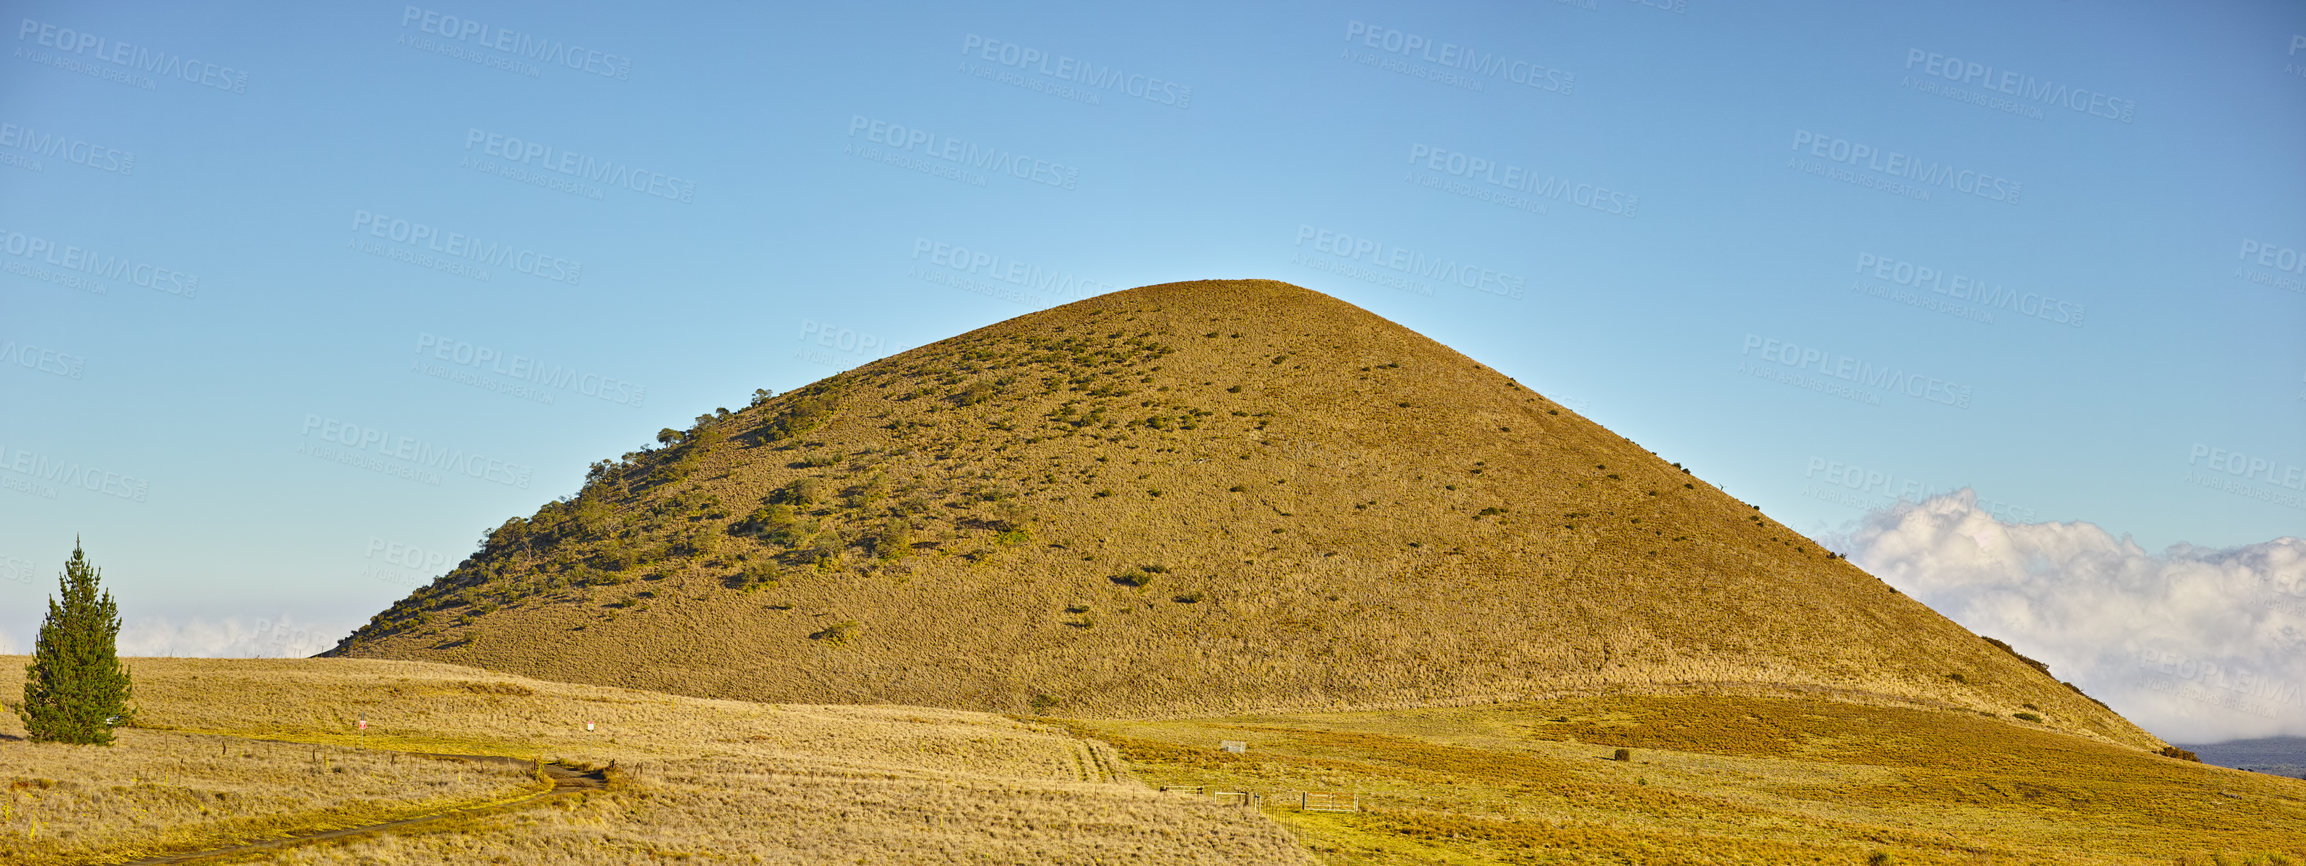 Buy stock photo Dry, field and landscape of environment with hill or grass on Volcano, Mount Kea and nature in Hawaii. Mountain, countryside and travel in summer to hillside with blue sky, clouds and tree in bush